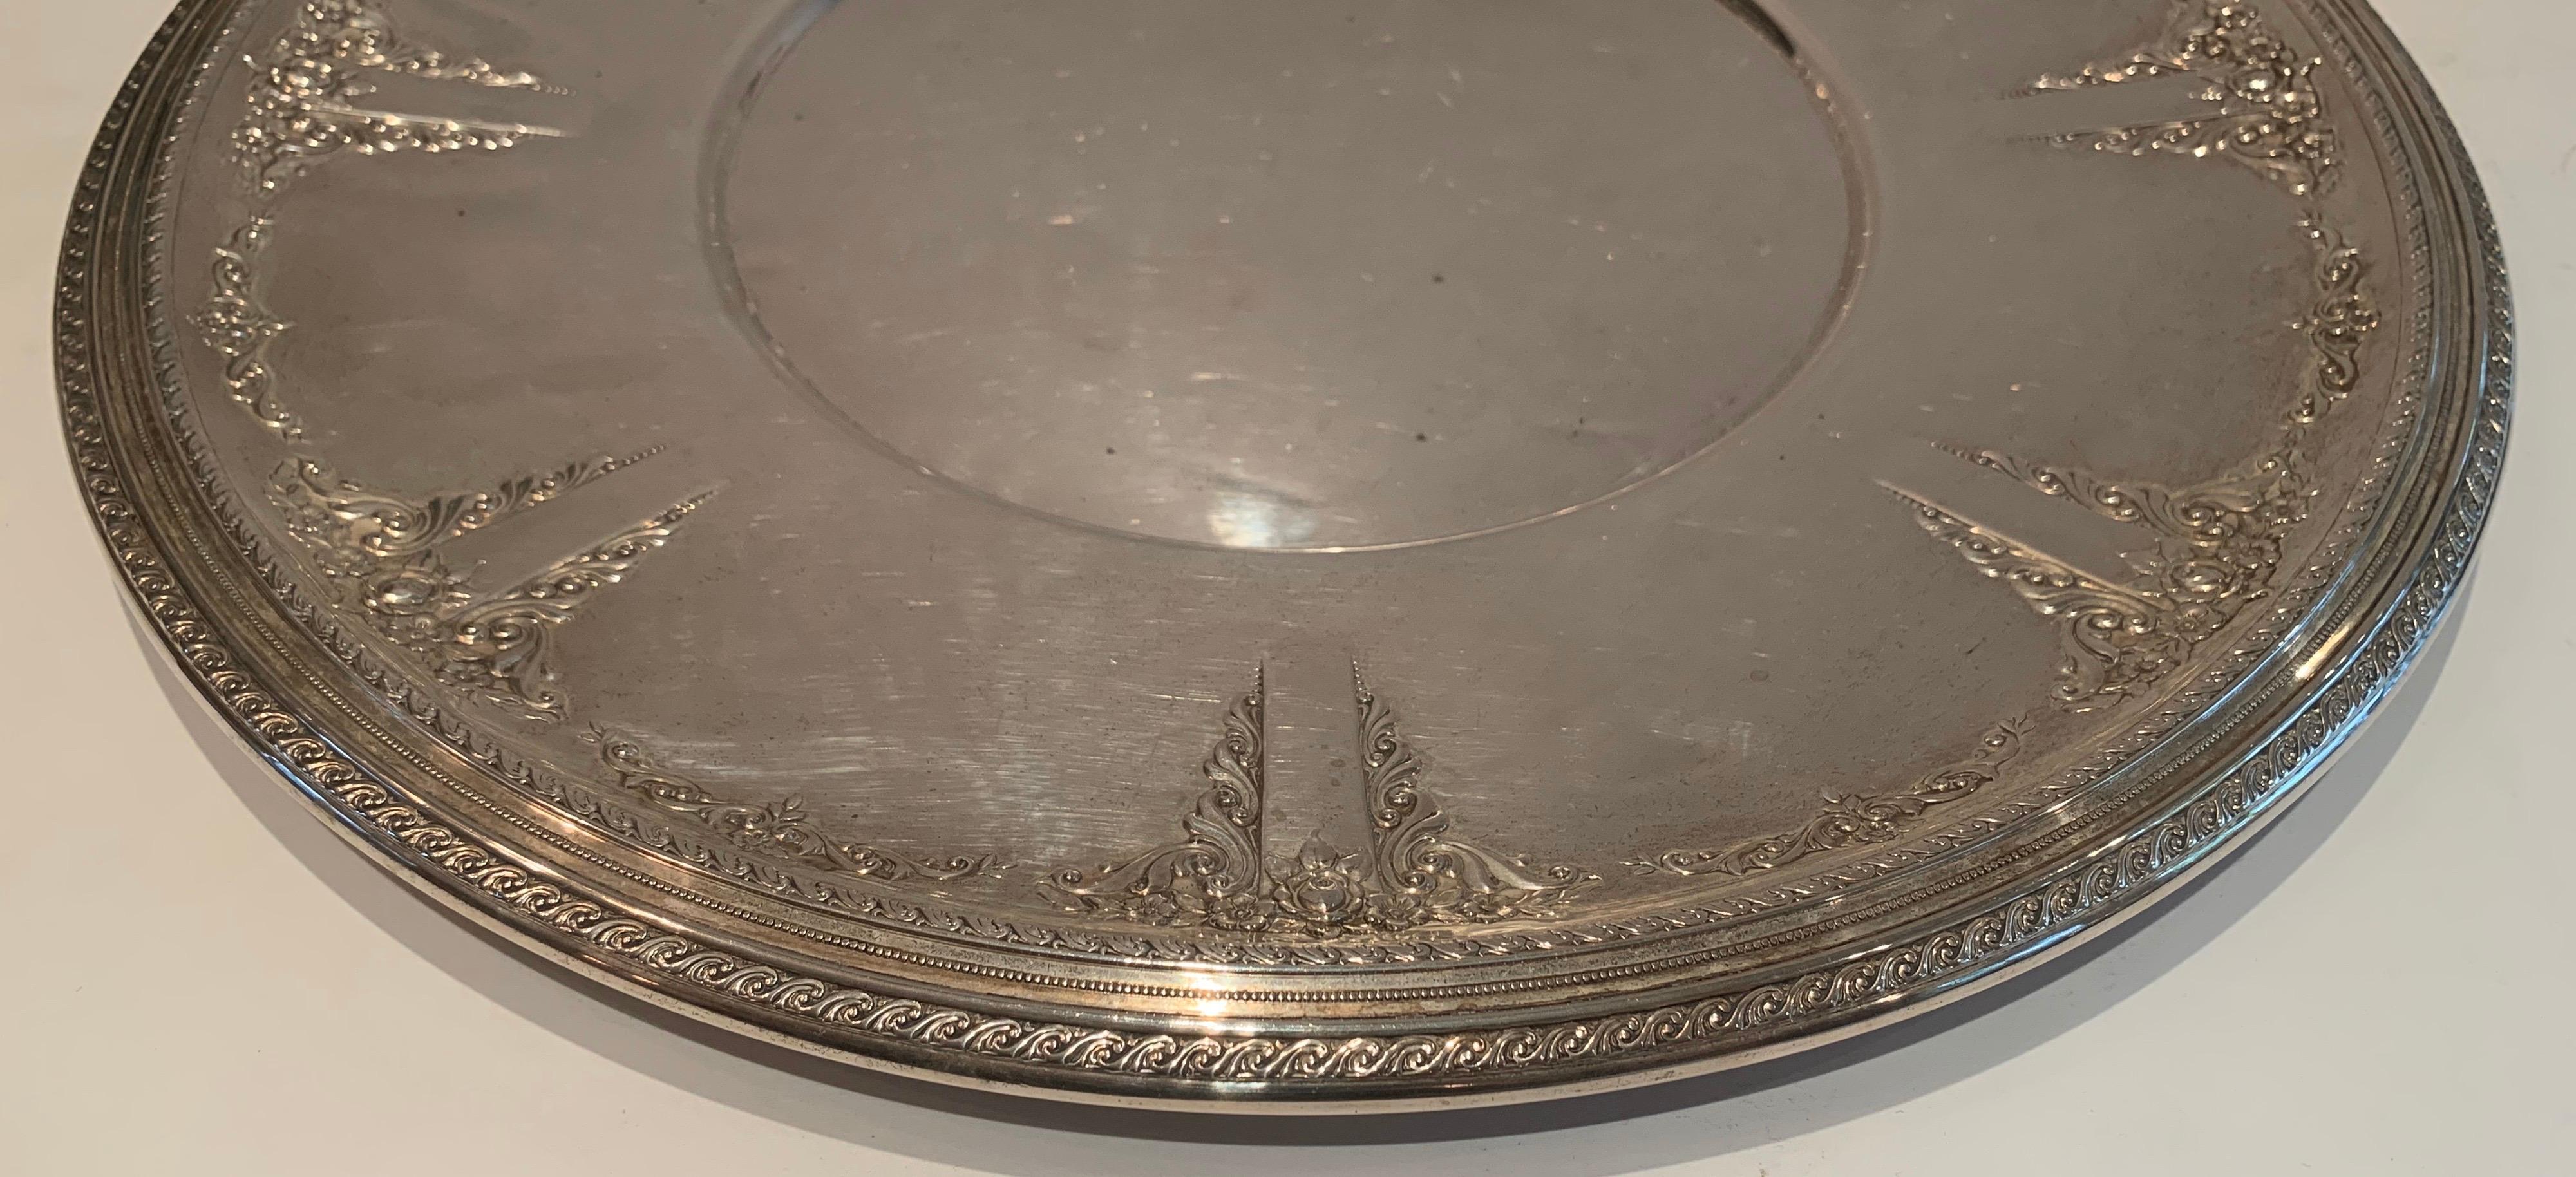 A wonderful large Wallace sterling silver round platter tray in the Mozart pattern.